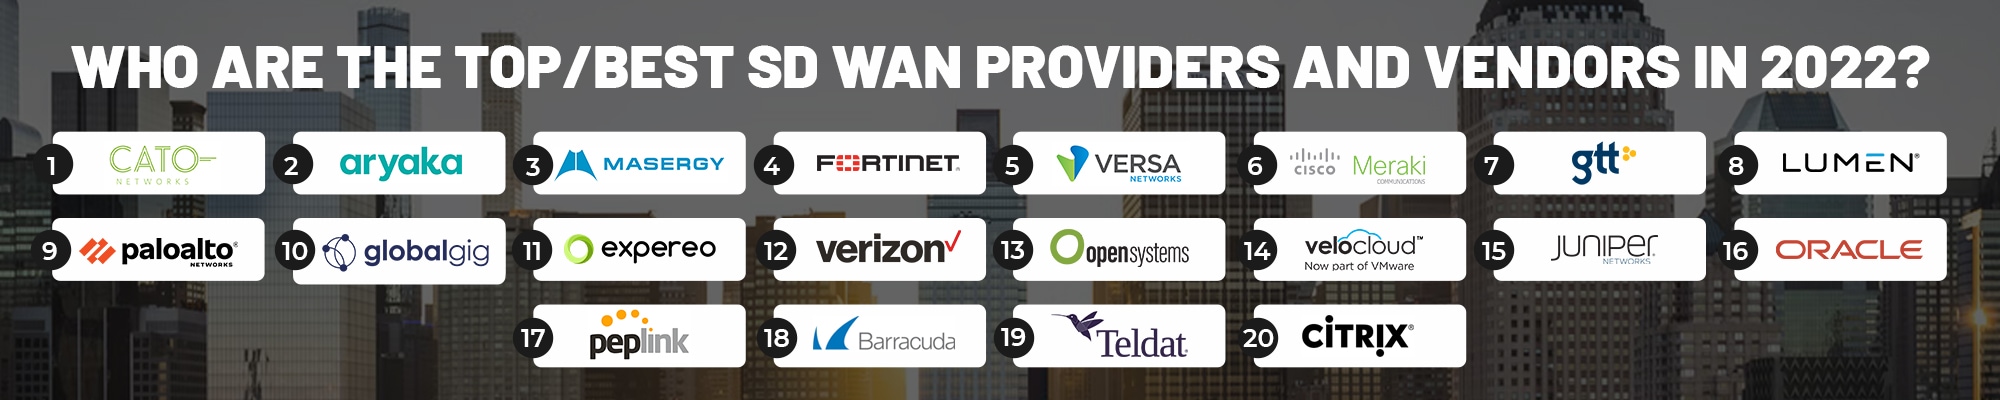 Top and Best SD WAN Providers and Vendors in 2022-2